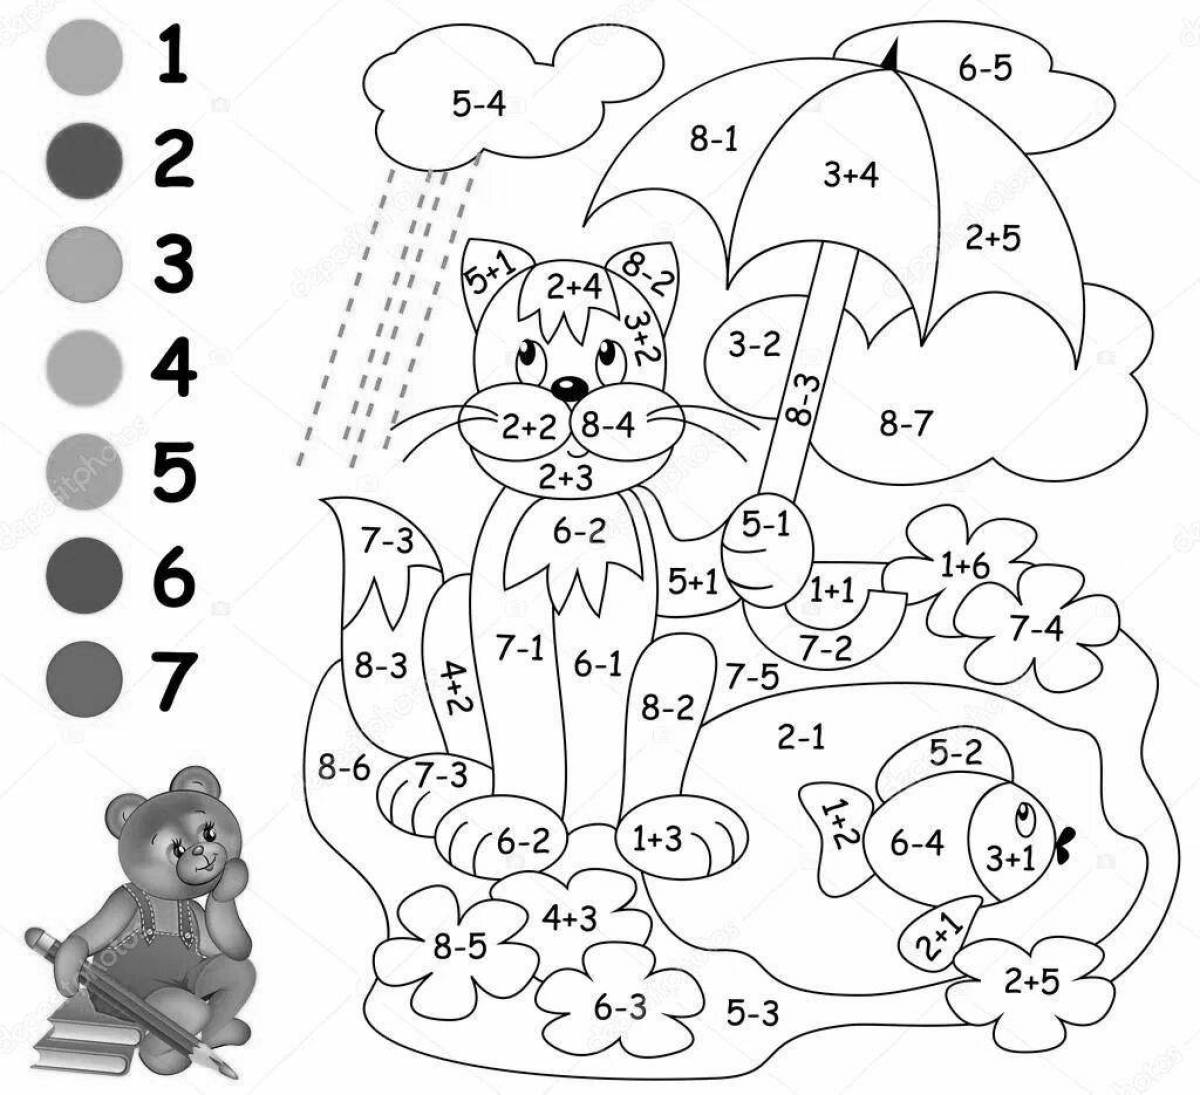 Intriguing coloring by numbers for children 7 years old